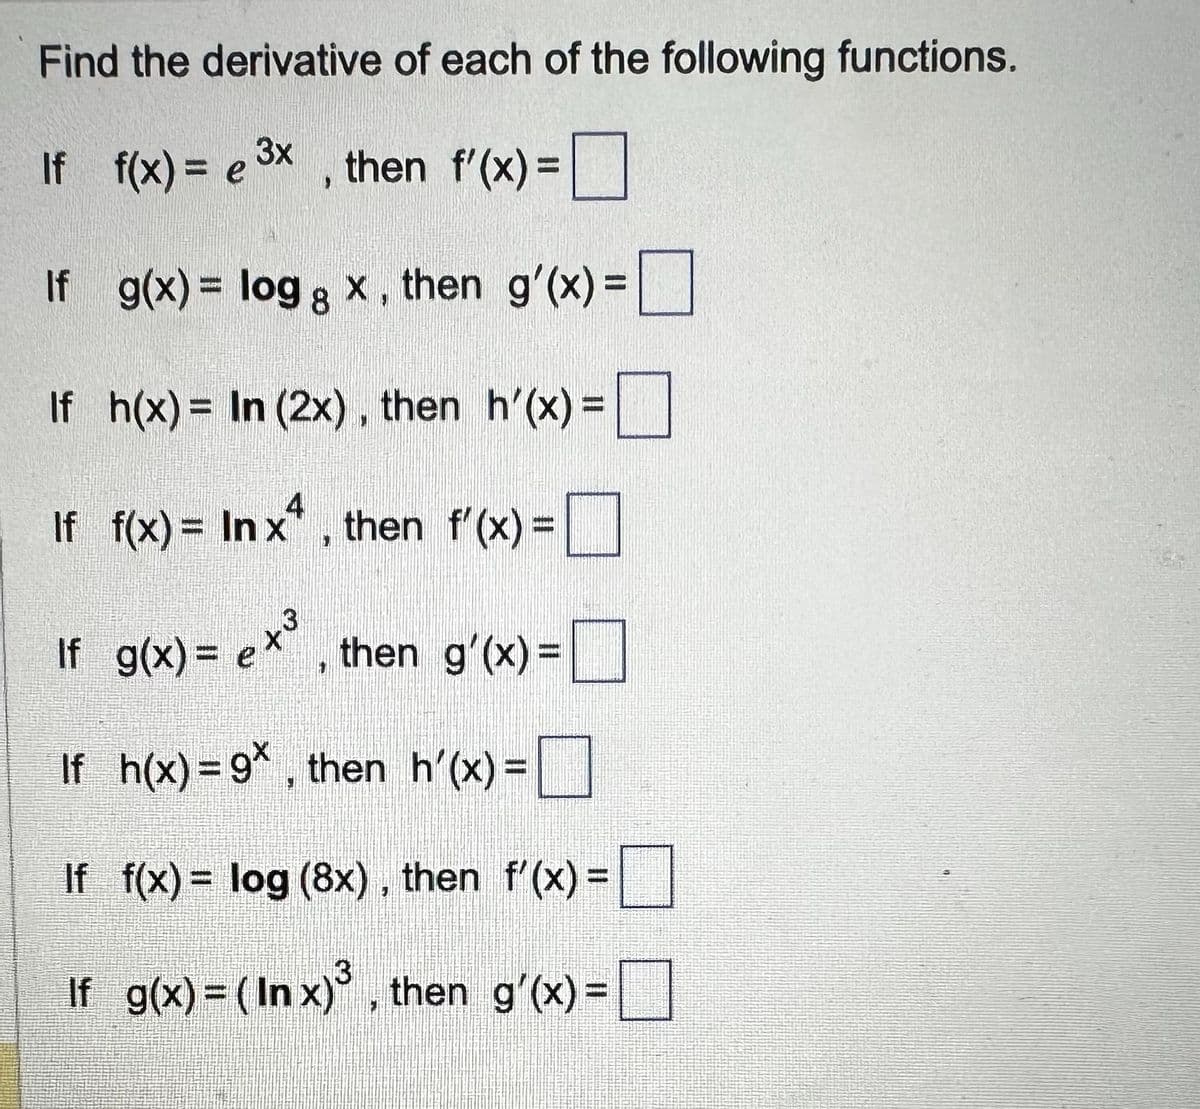 Find the derivative of each of the following functions.
3x
If f(x) = e ³x, then f'(x) = [
If
g(x) = log 8 x, then g'(x) =
If h(x) = In (2x), then h'(x) =
If f(x) = Inxª, then f'(x) =
If g(x) = ex³, then g'(x) =
If h(x)=9*, then_h'(x) =
If f(x) = log (8x), then f'(x) =
If g(x) = (Inx)³, then g'(x) =
3